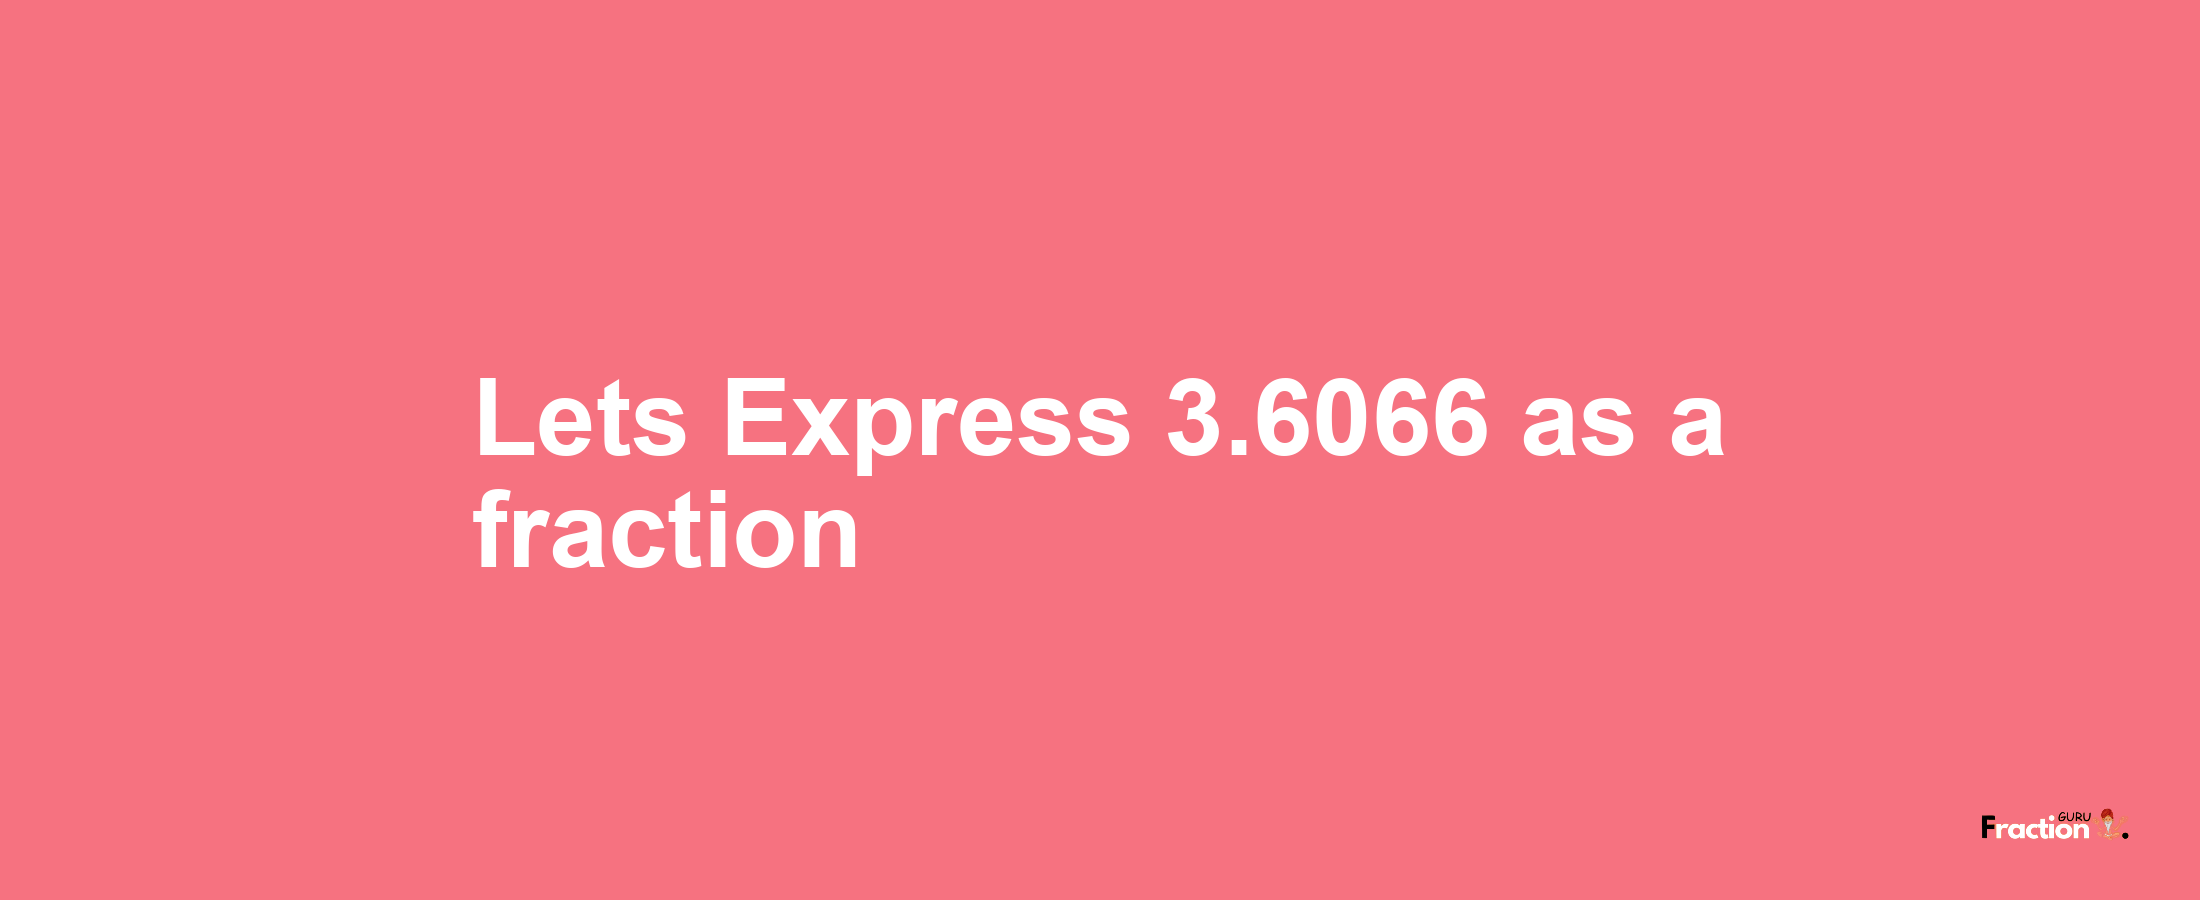 Lets Express 3.6066 as afraction